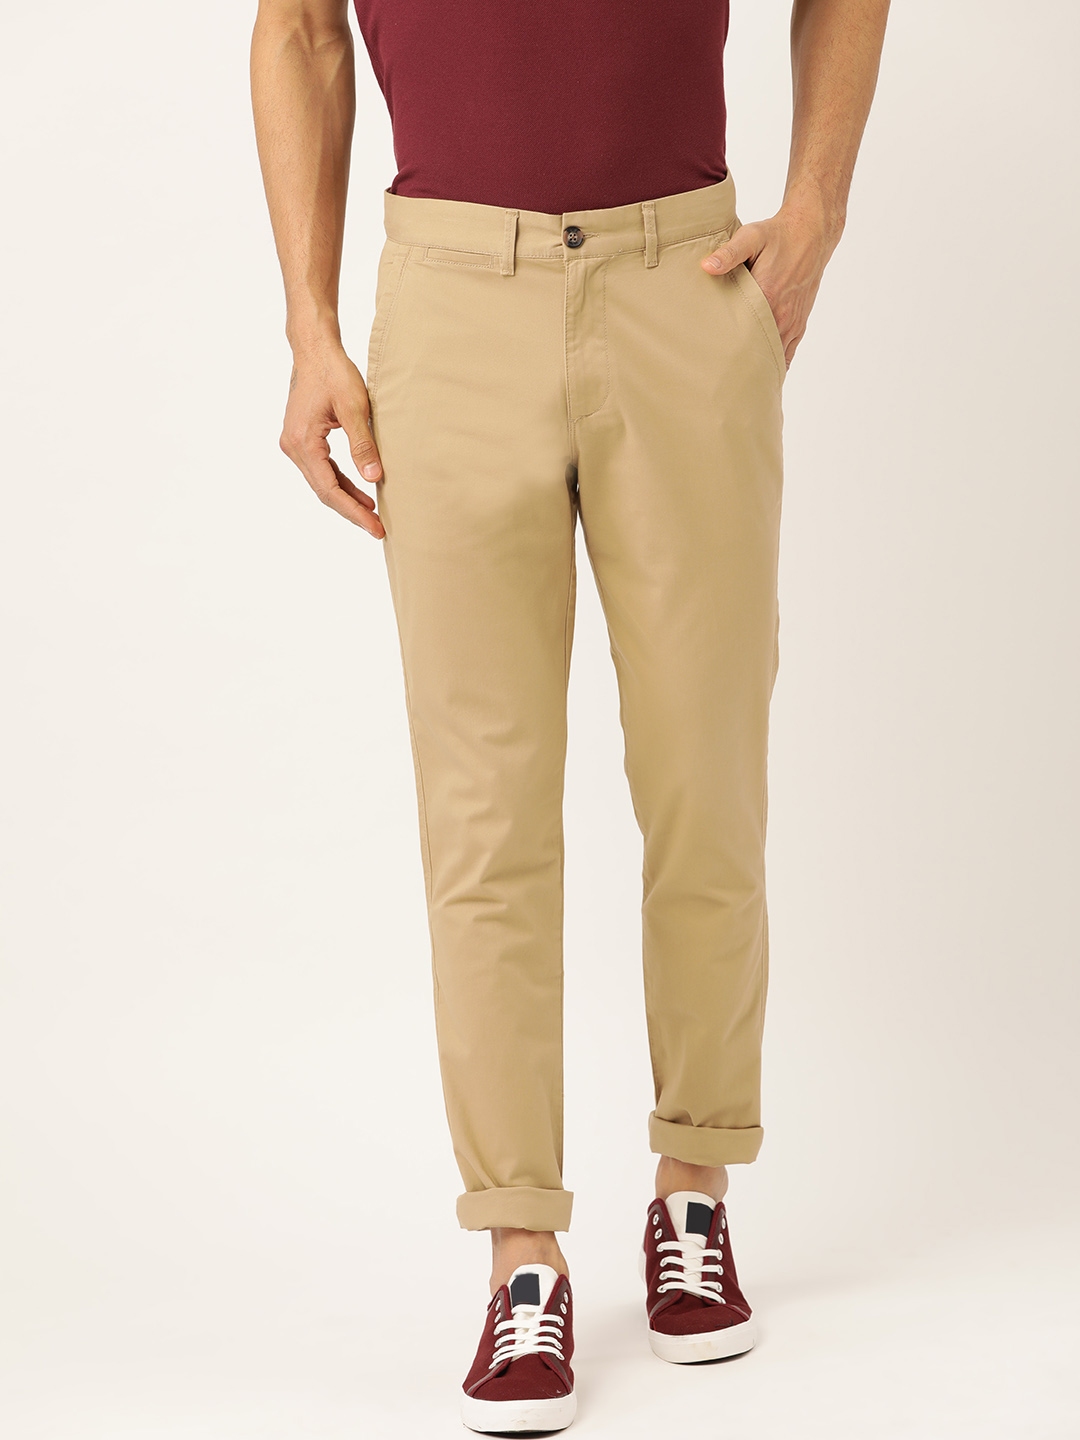 Buy United Colors Of Benetton Men Beige Slim Fit Solid Chinos ...